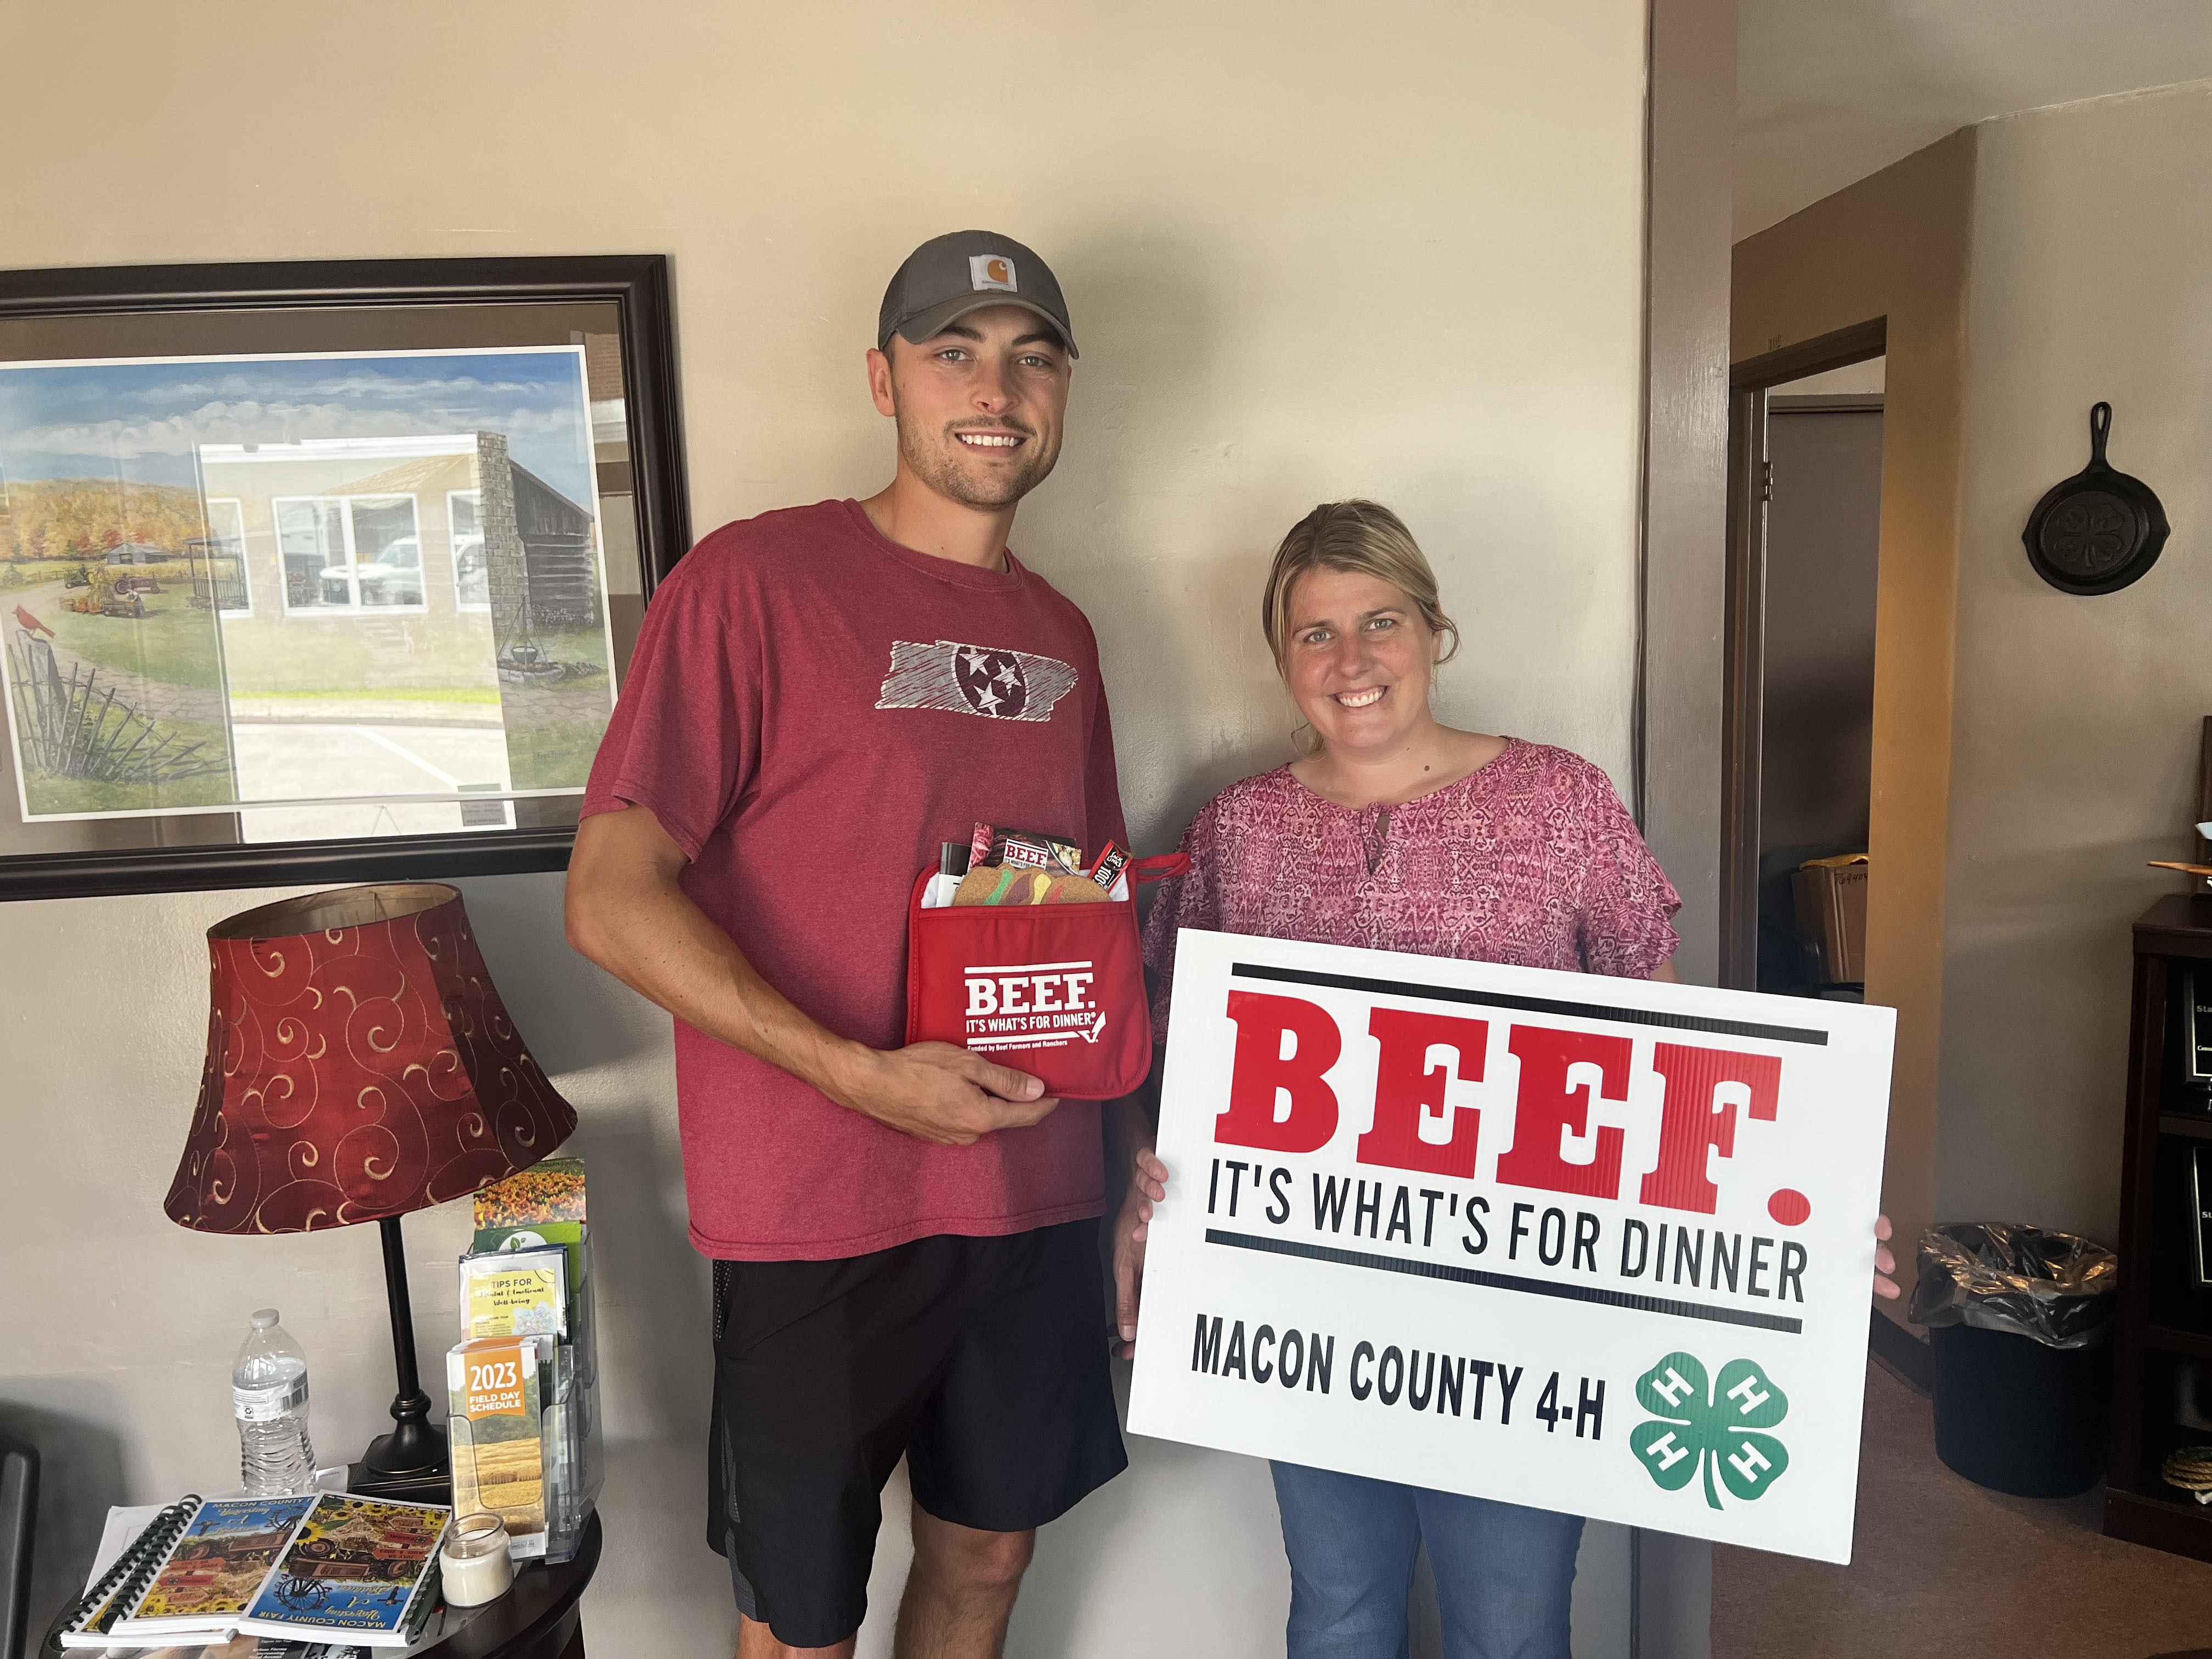 Macon County 4-H Winners All Star Beef Backer Contest Press Release